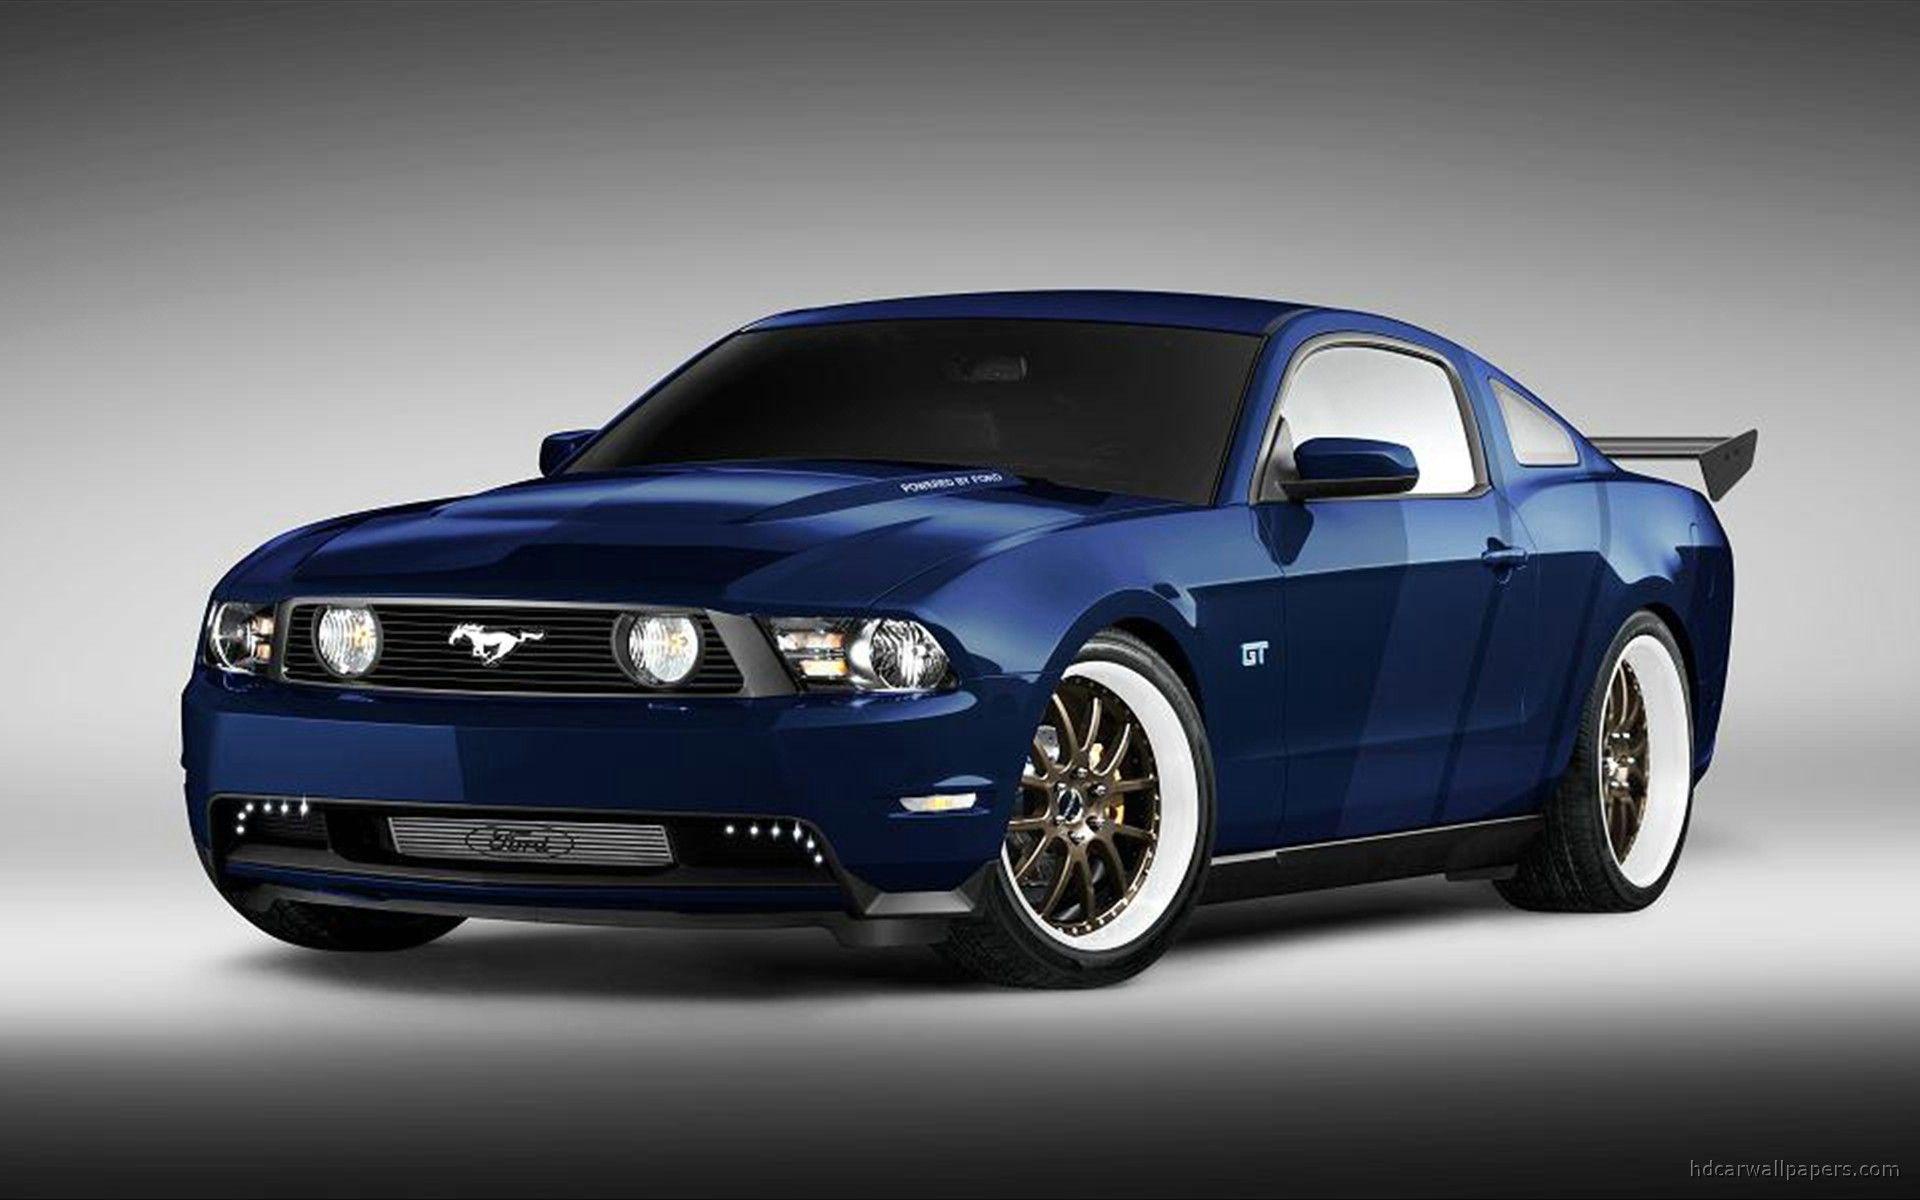 ford mustang #mustang. Sunrise Ford Fontana Cars